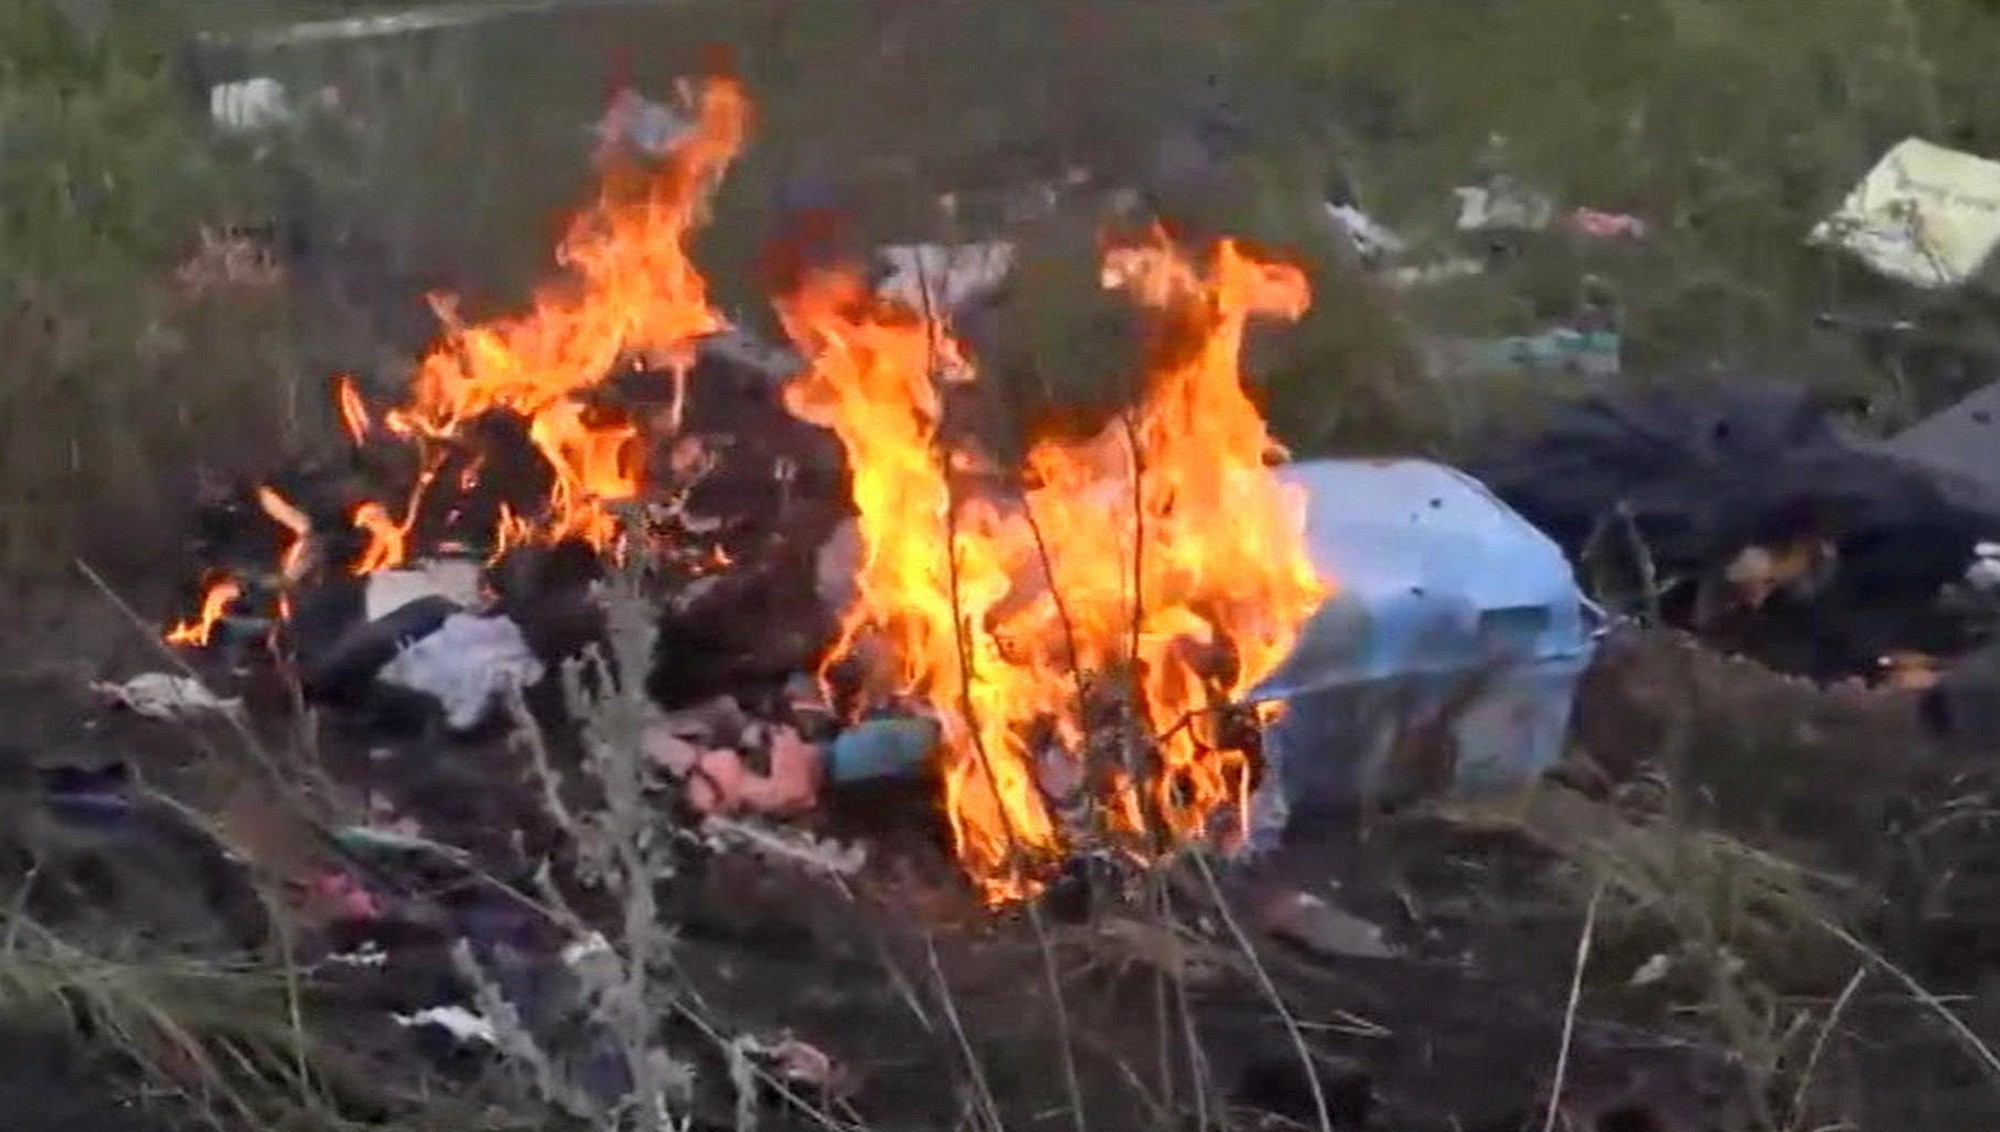 In this image taken from video Thursdayshows flames rising from part of the wreckage of a passenger plane carrying 298 people after it was apparently shot down Thursday as it flew over Ukraine, near the village of Hrabove, in eastern Ukraine.